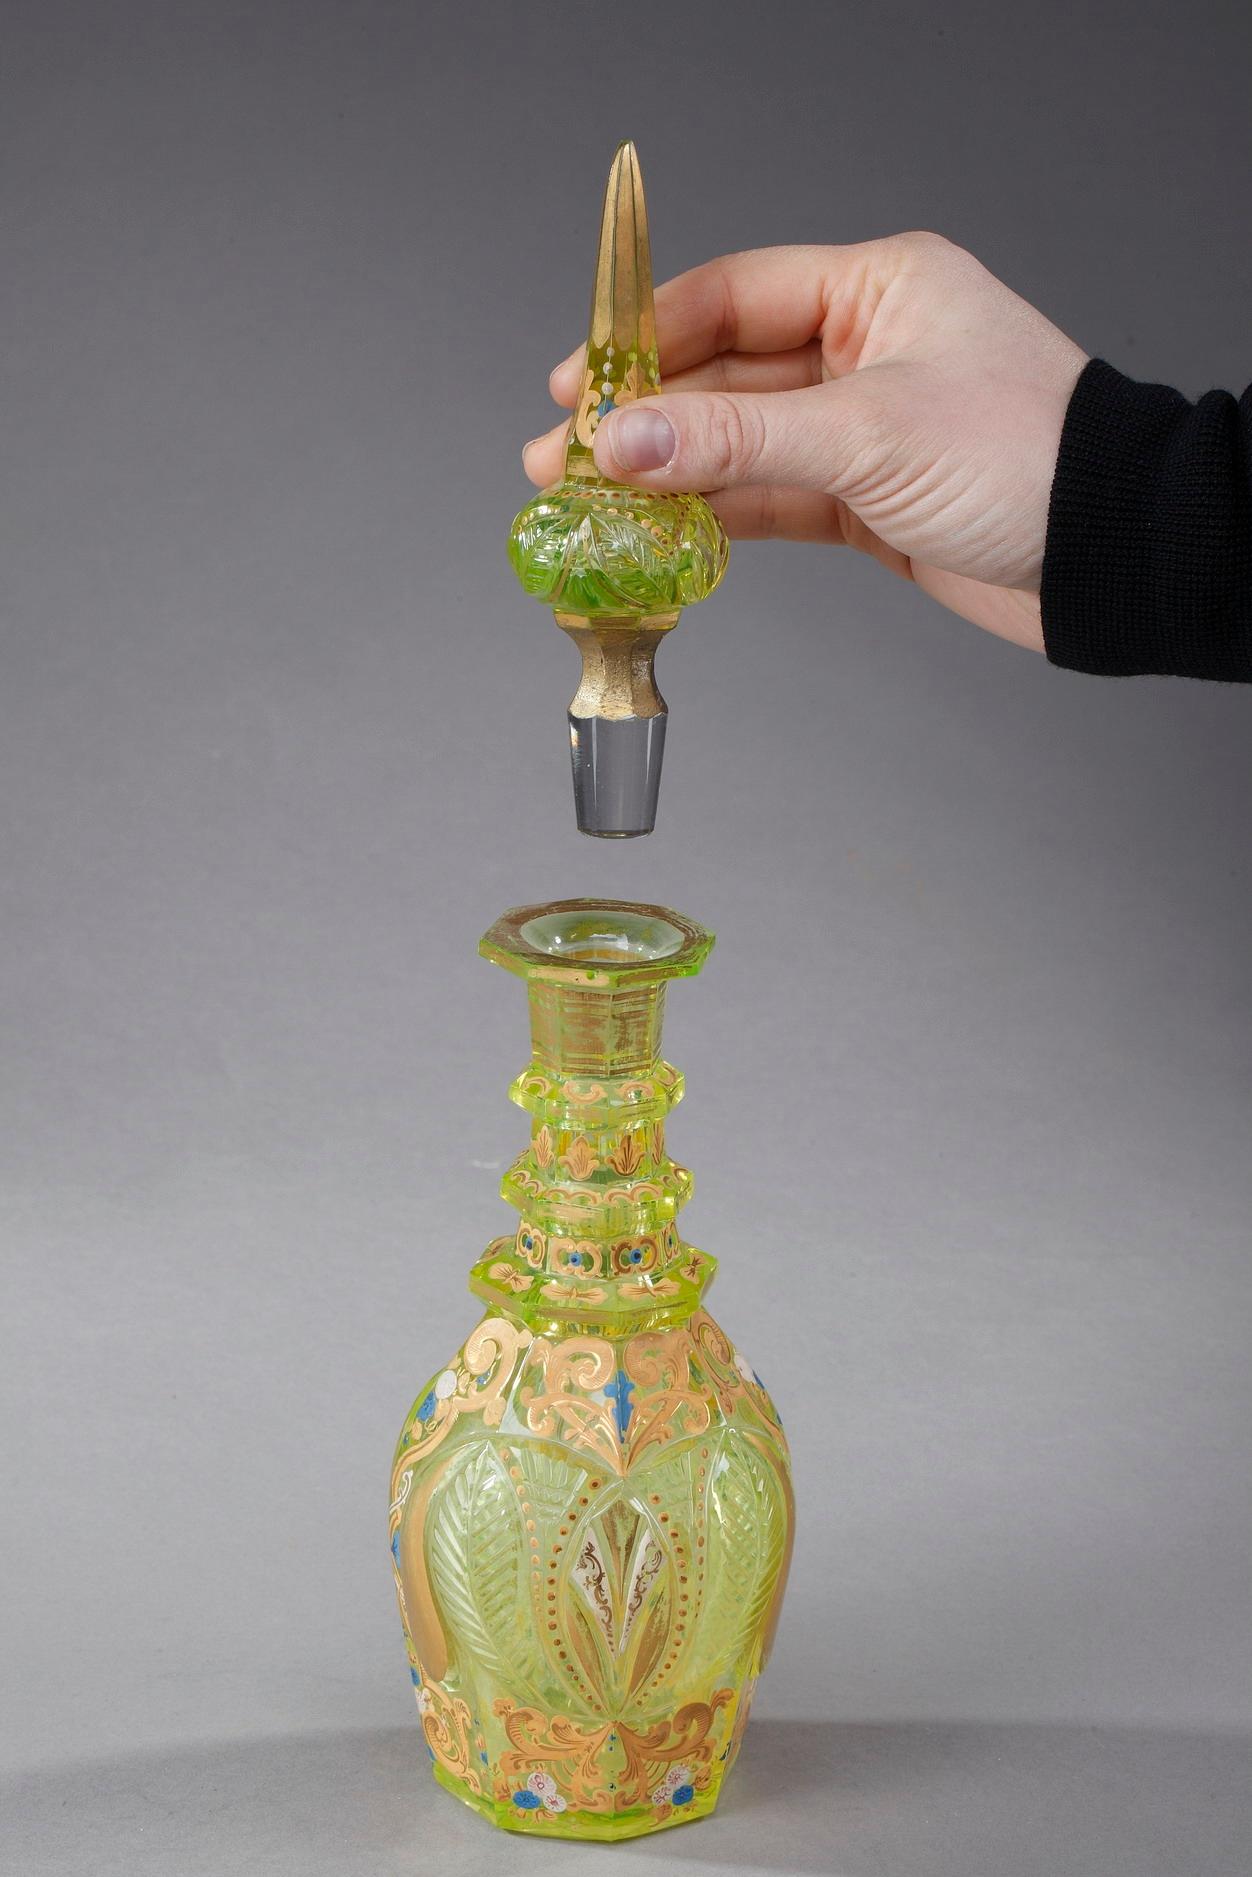 Ouraline glass decanter with its pointed stopper, decorated with painted and enameled foliage, arabesques and floral motifs. Three interspaced rings adorn the collar while floral and geometrical patterns highlight the paunch. Bohemia for the East,